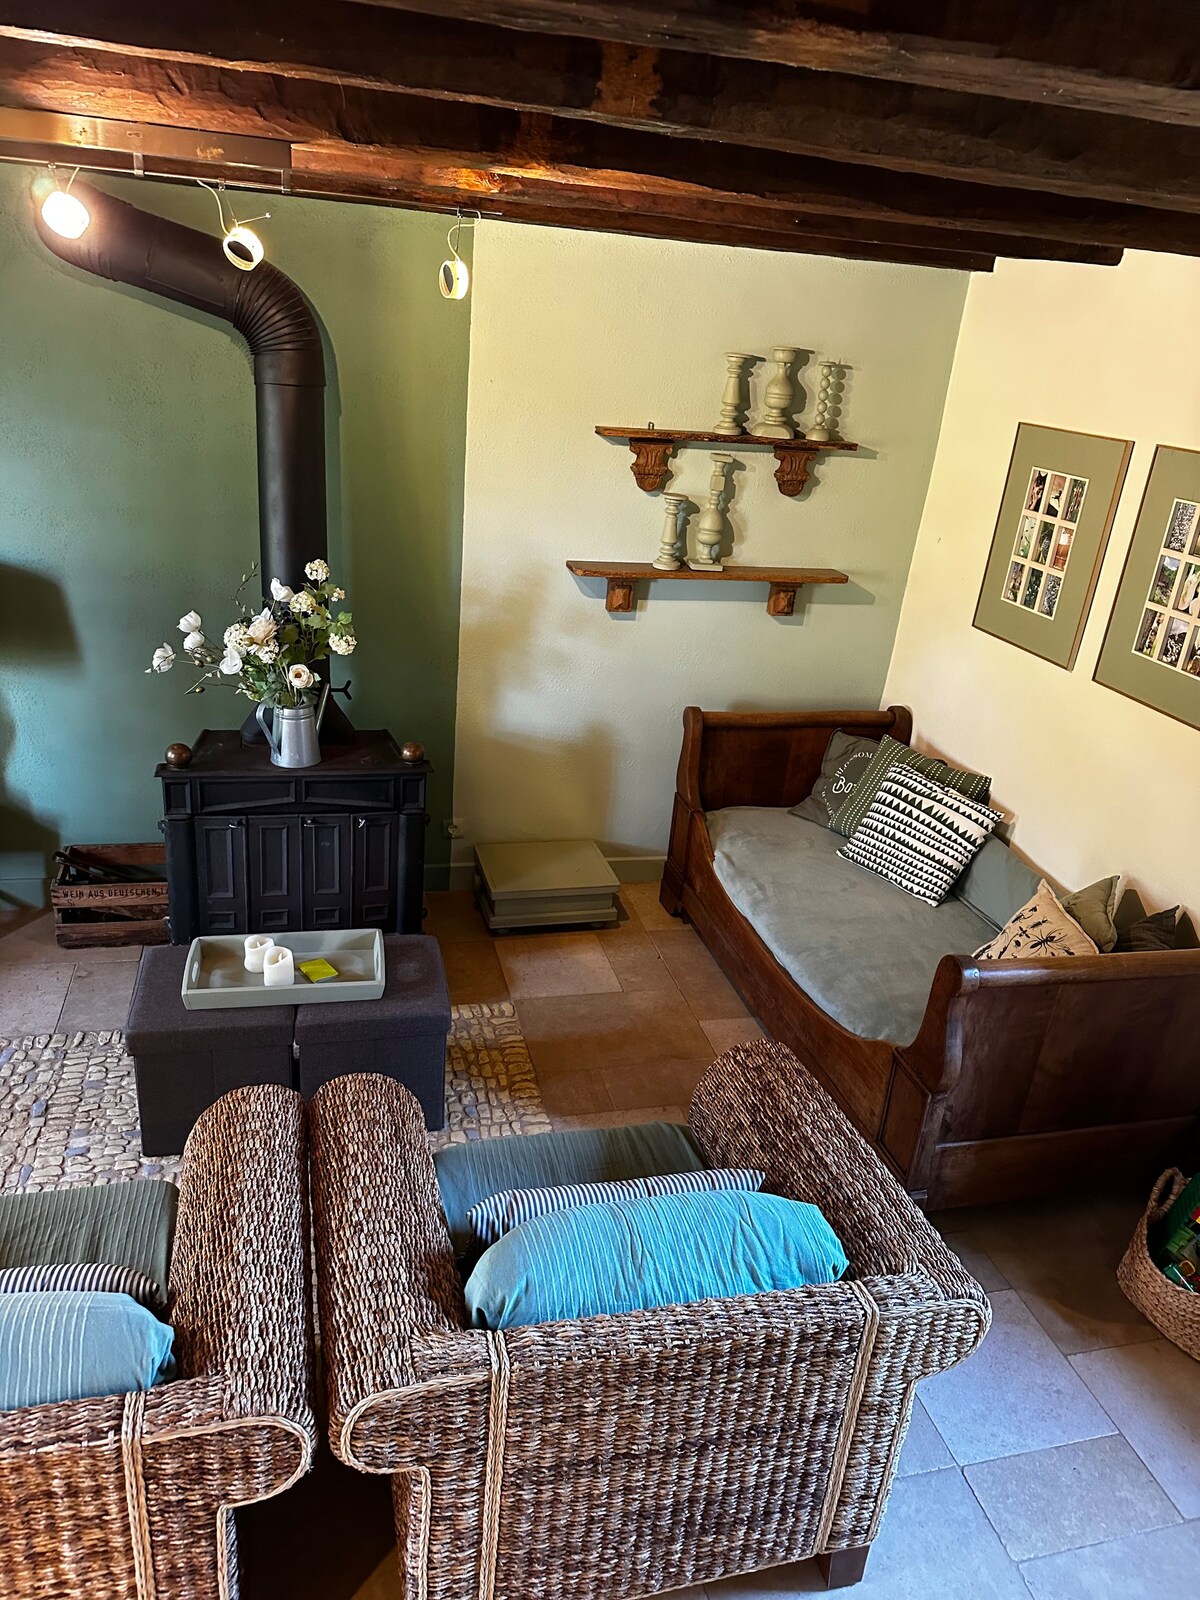 Lo Cretsou, 8 pers holiday home nearby Sarlat